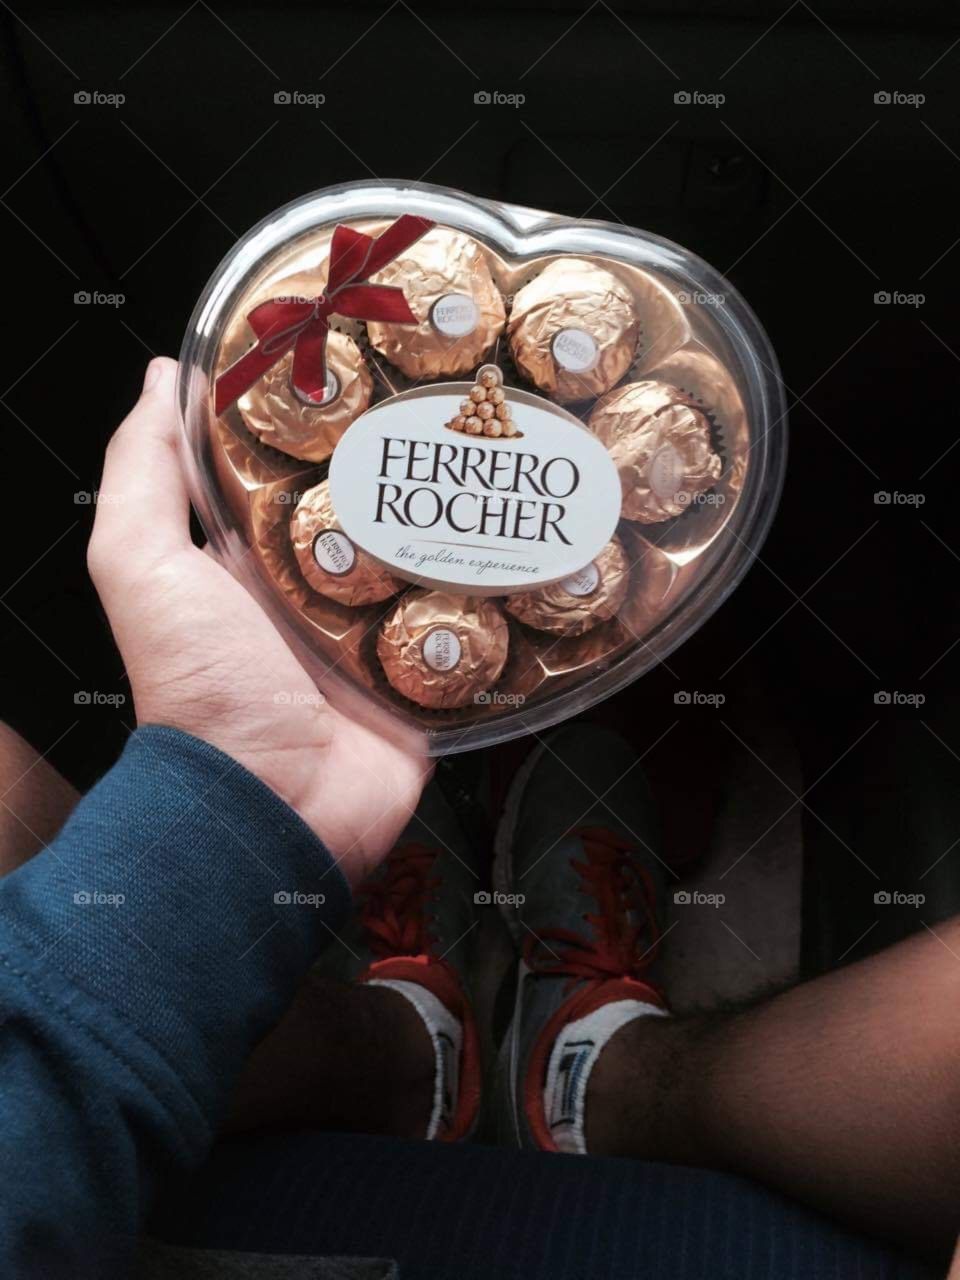 Give love and chocolates this Valentine’s Day!